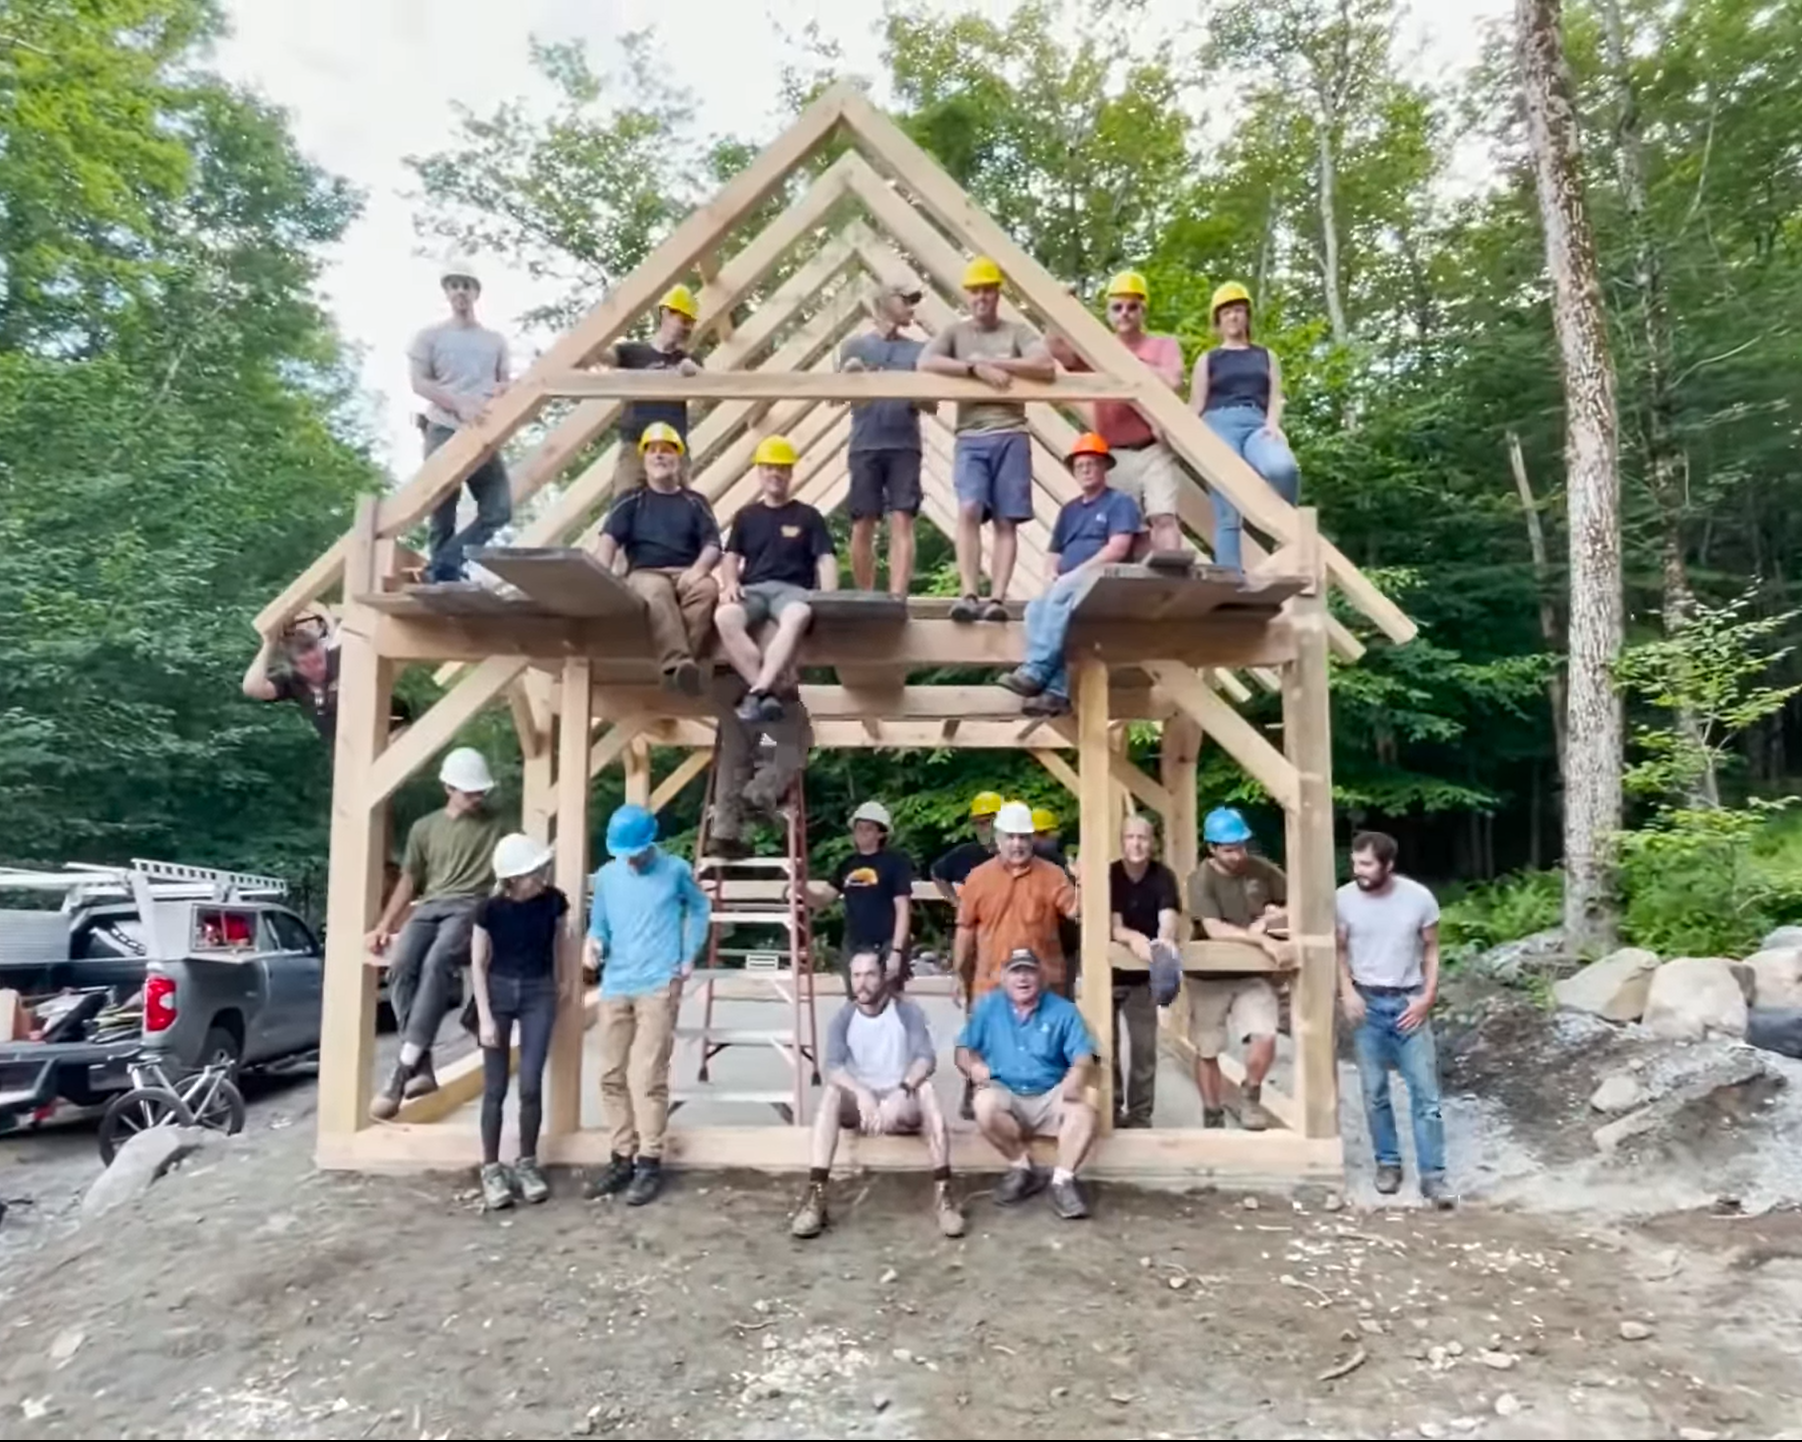 Check out this inside video about a timber framing class at The Heartwood School1